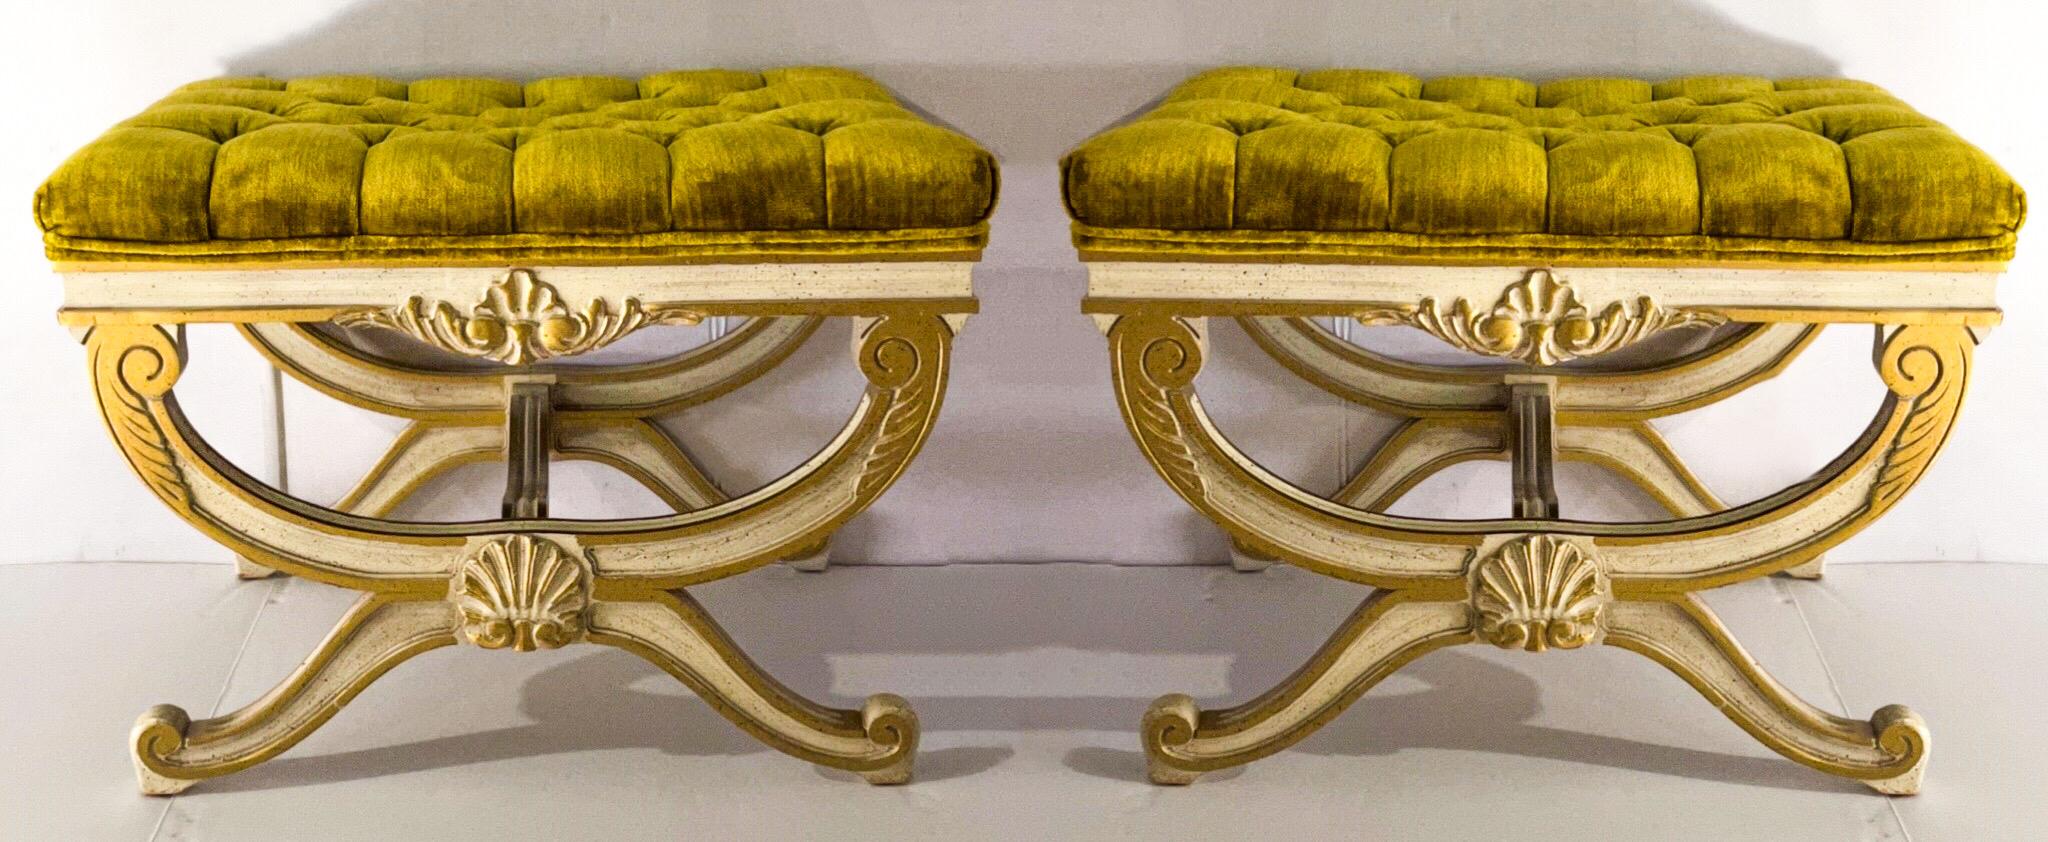 These are awesome. This is a pair of neo-classical style benches or ottomans in tufted citron velvet. They are unmarked, and the velvet is original.